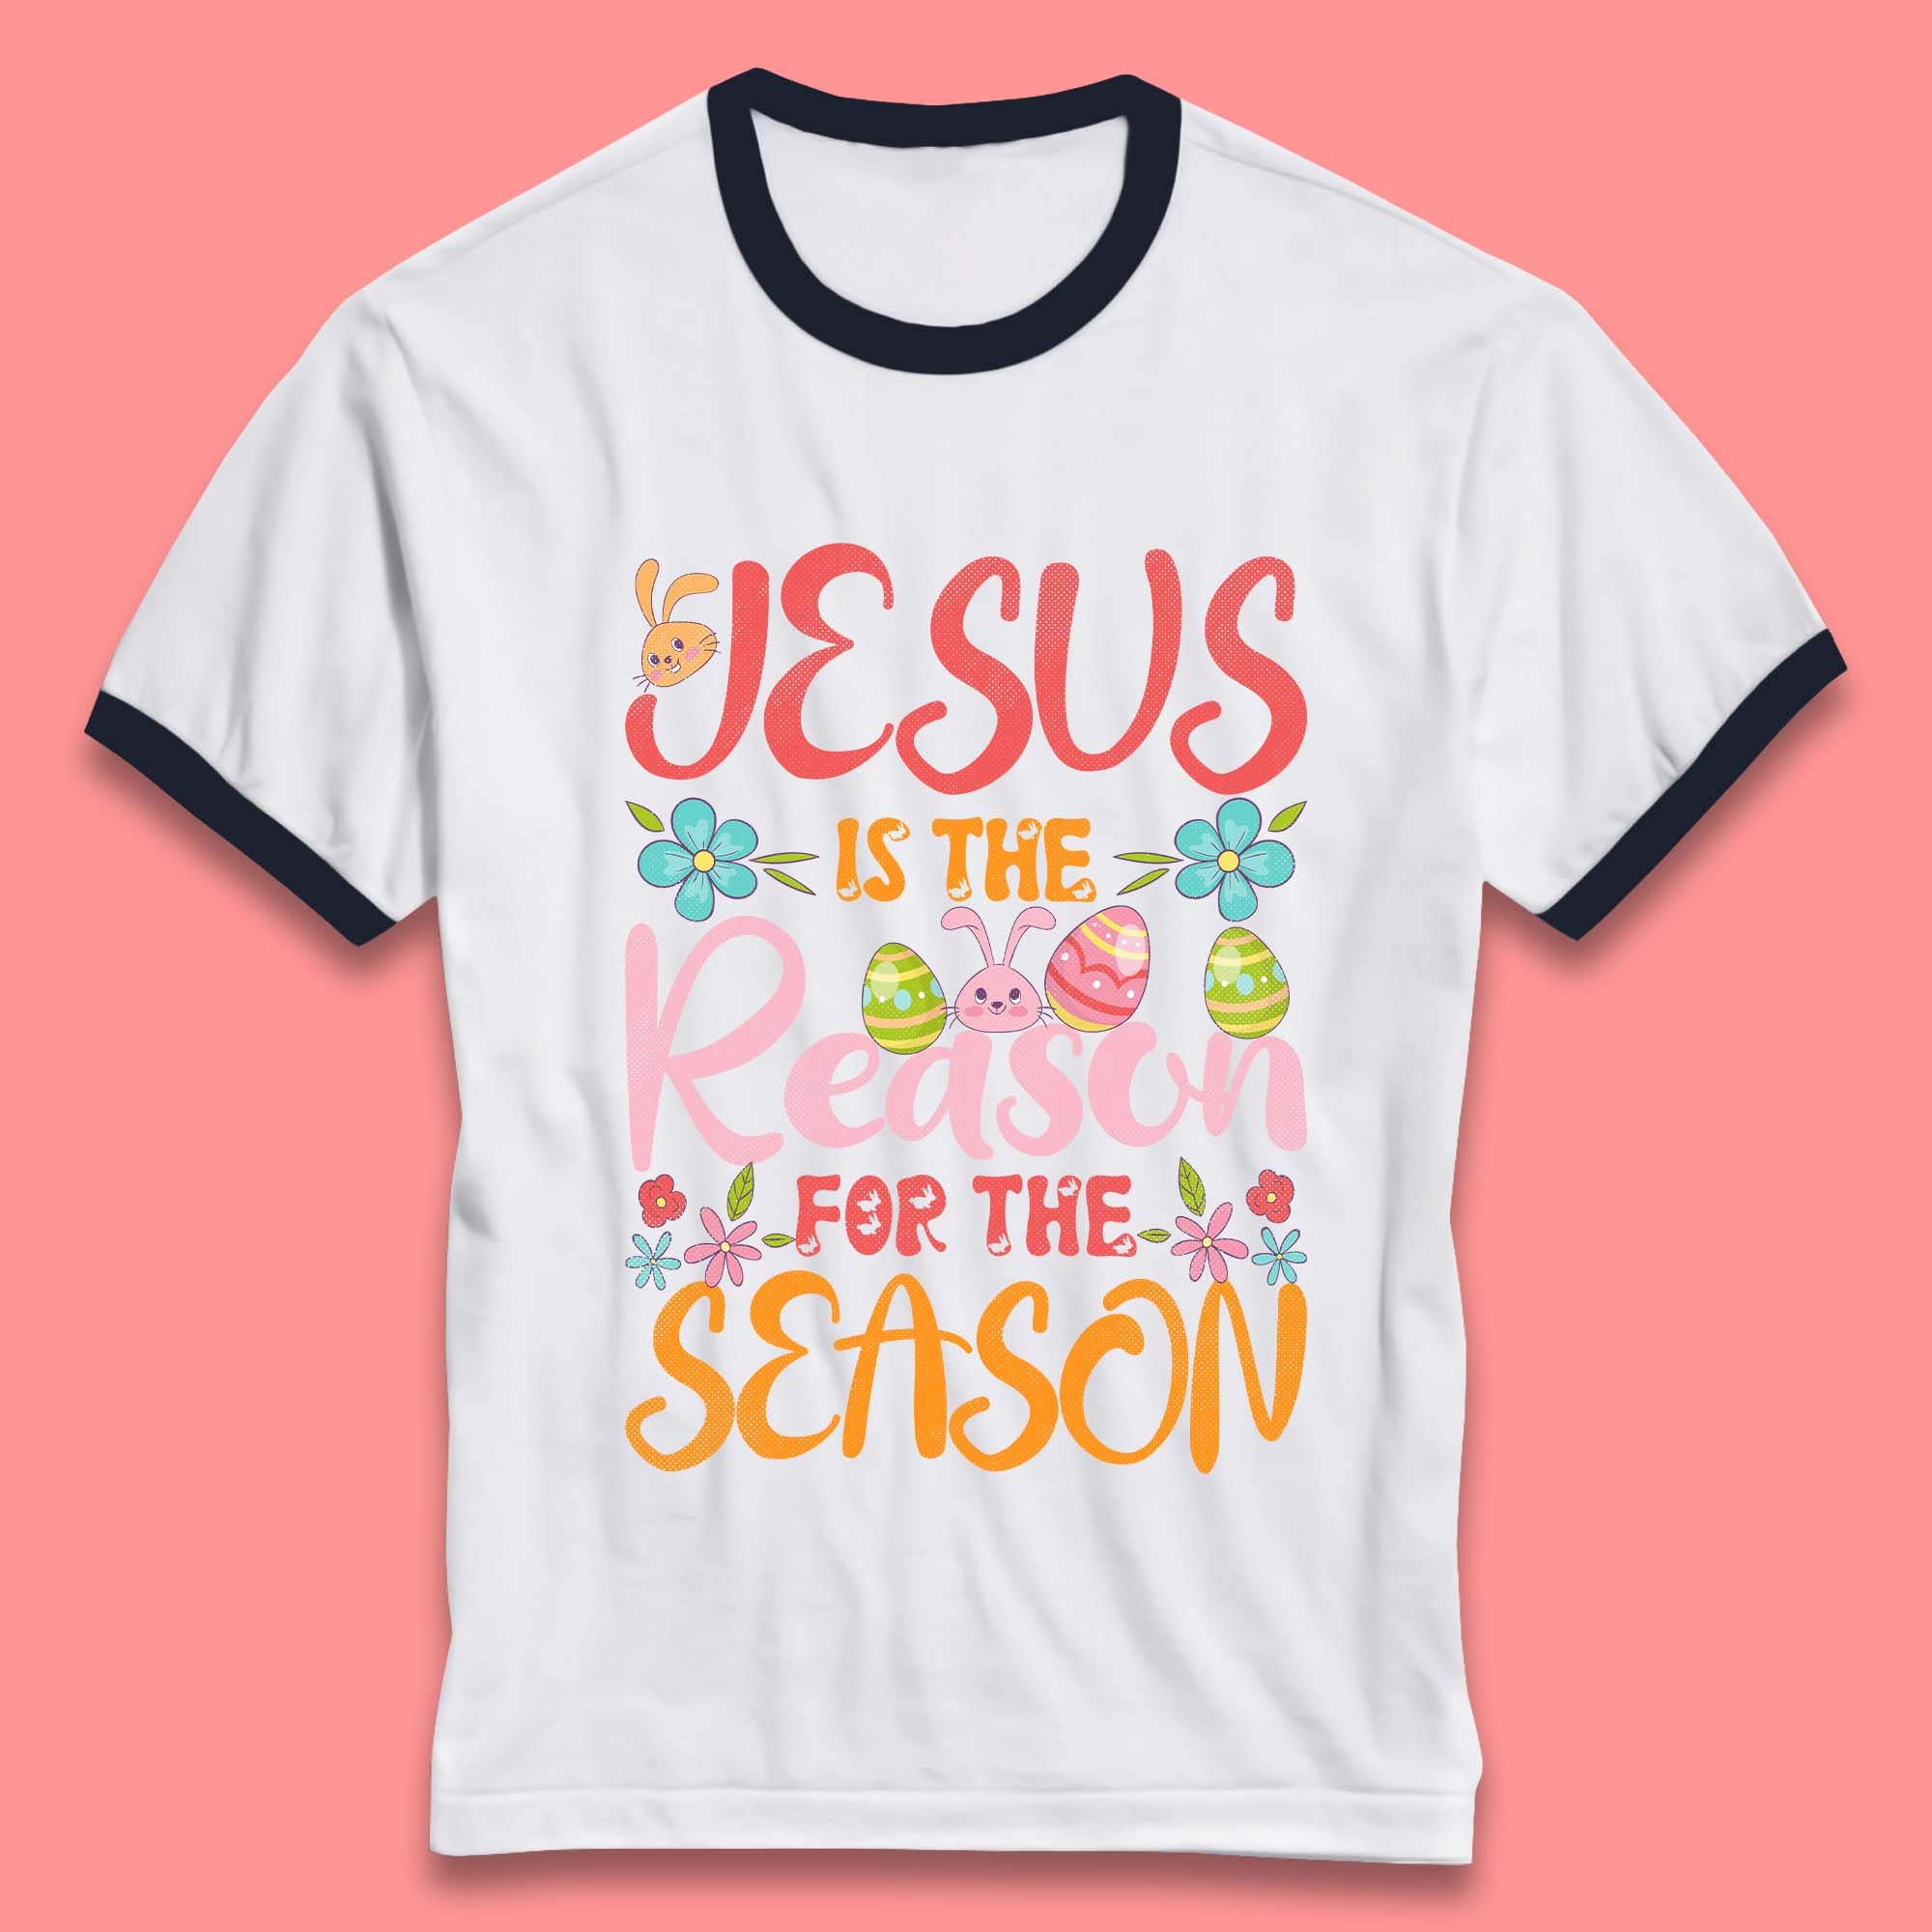 Jesus Is The Reason For The Season Ringer T-Shirt